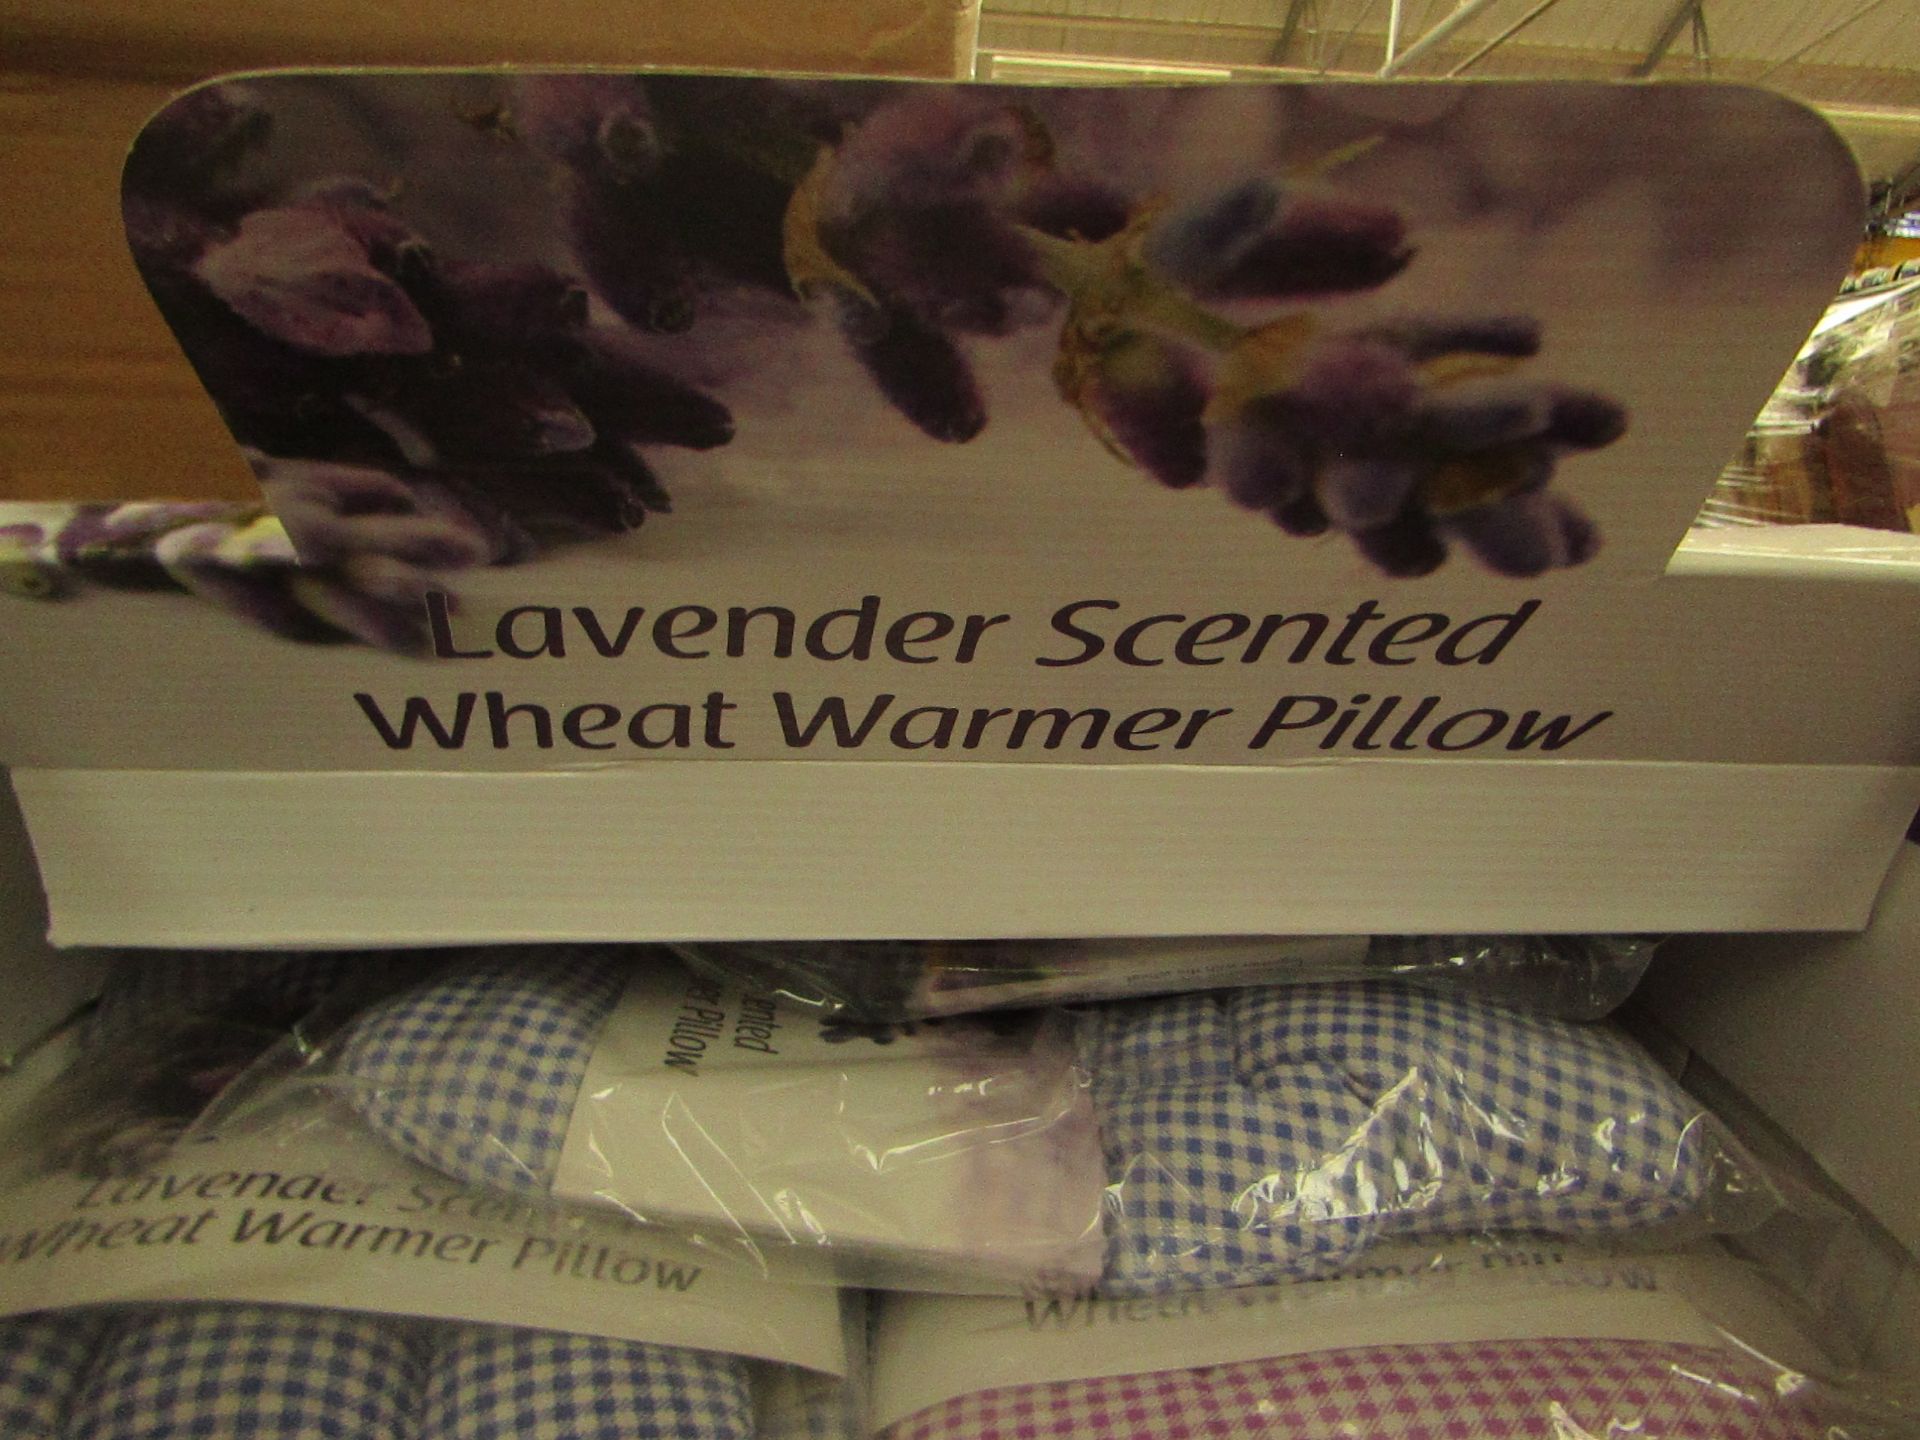 2x Lavendar Scented Wheat Pillow Warmer - Unused & Packaged.